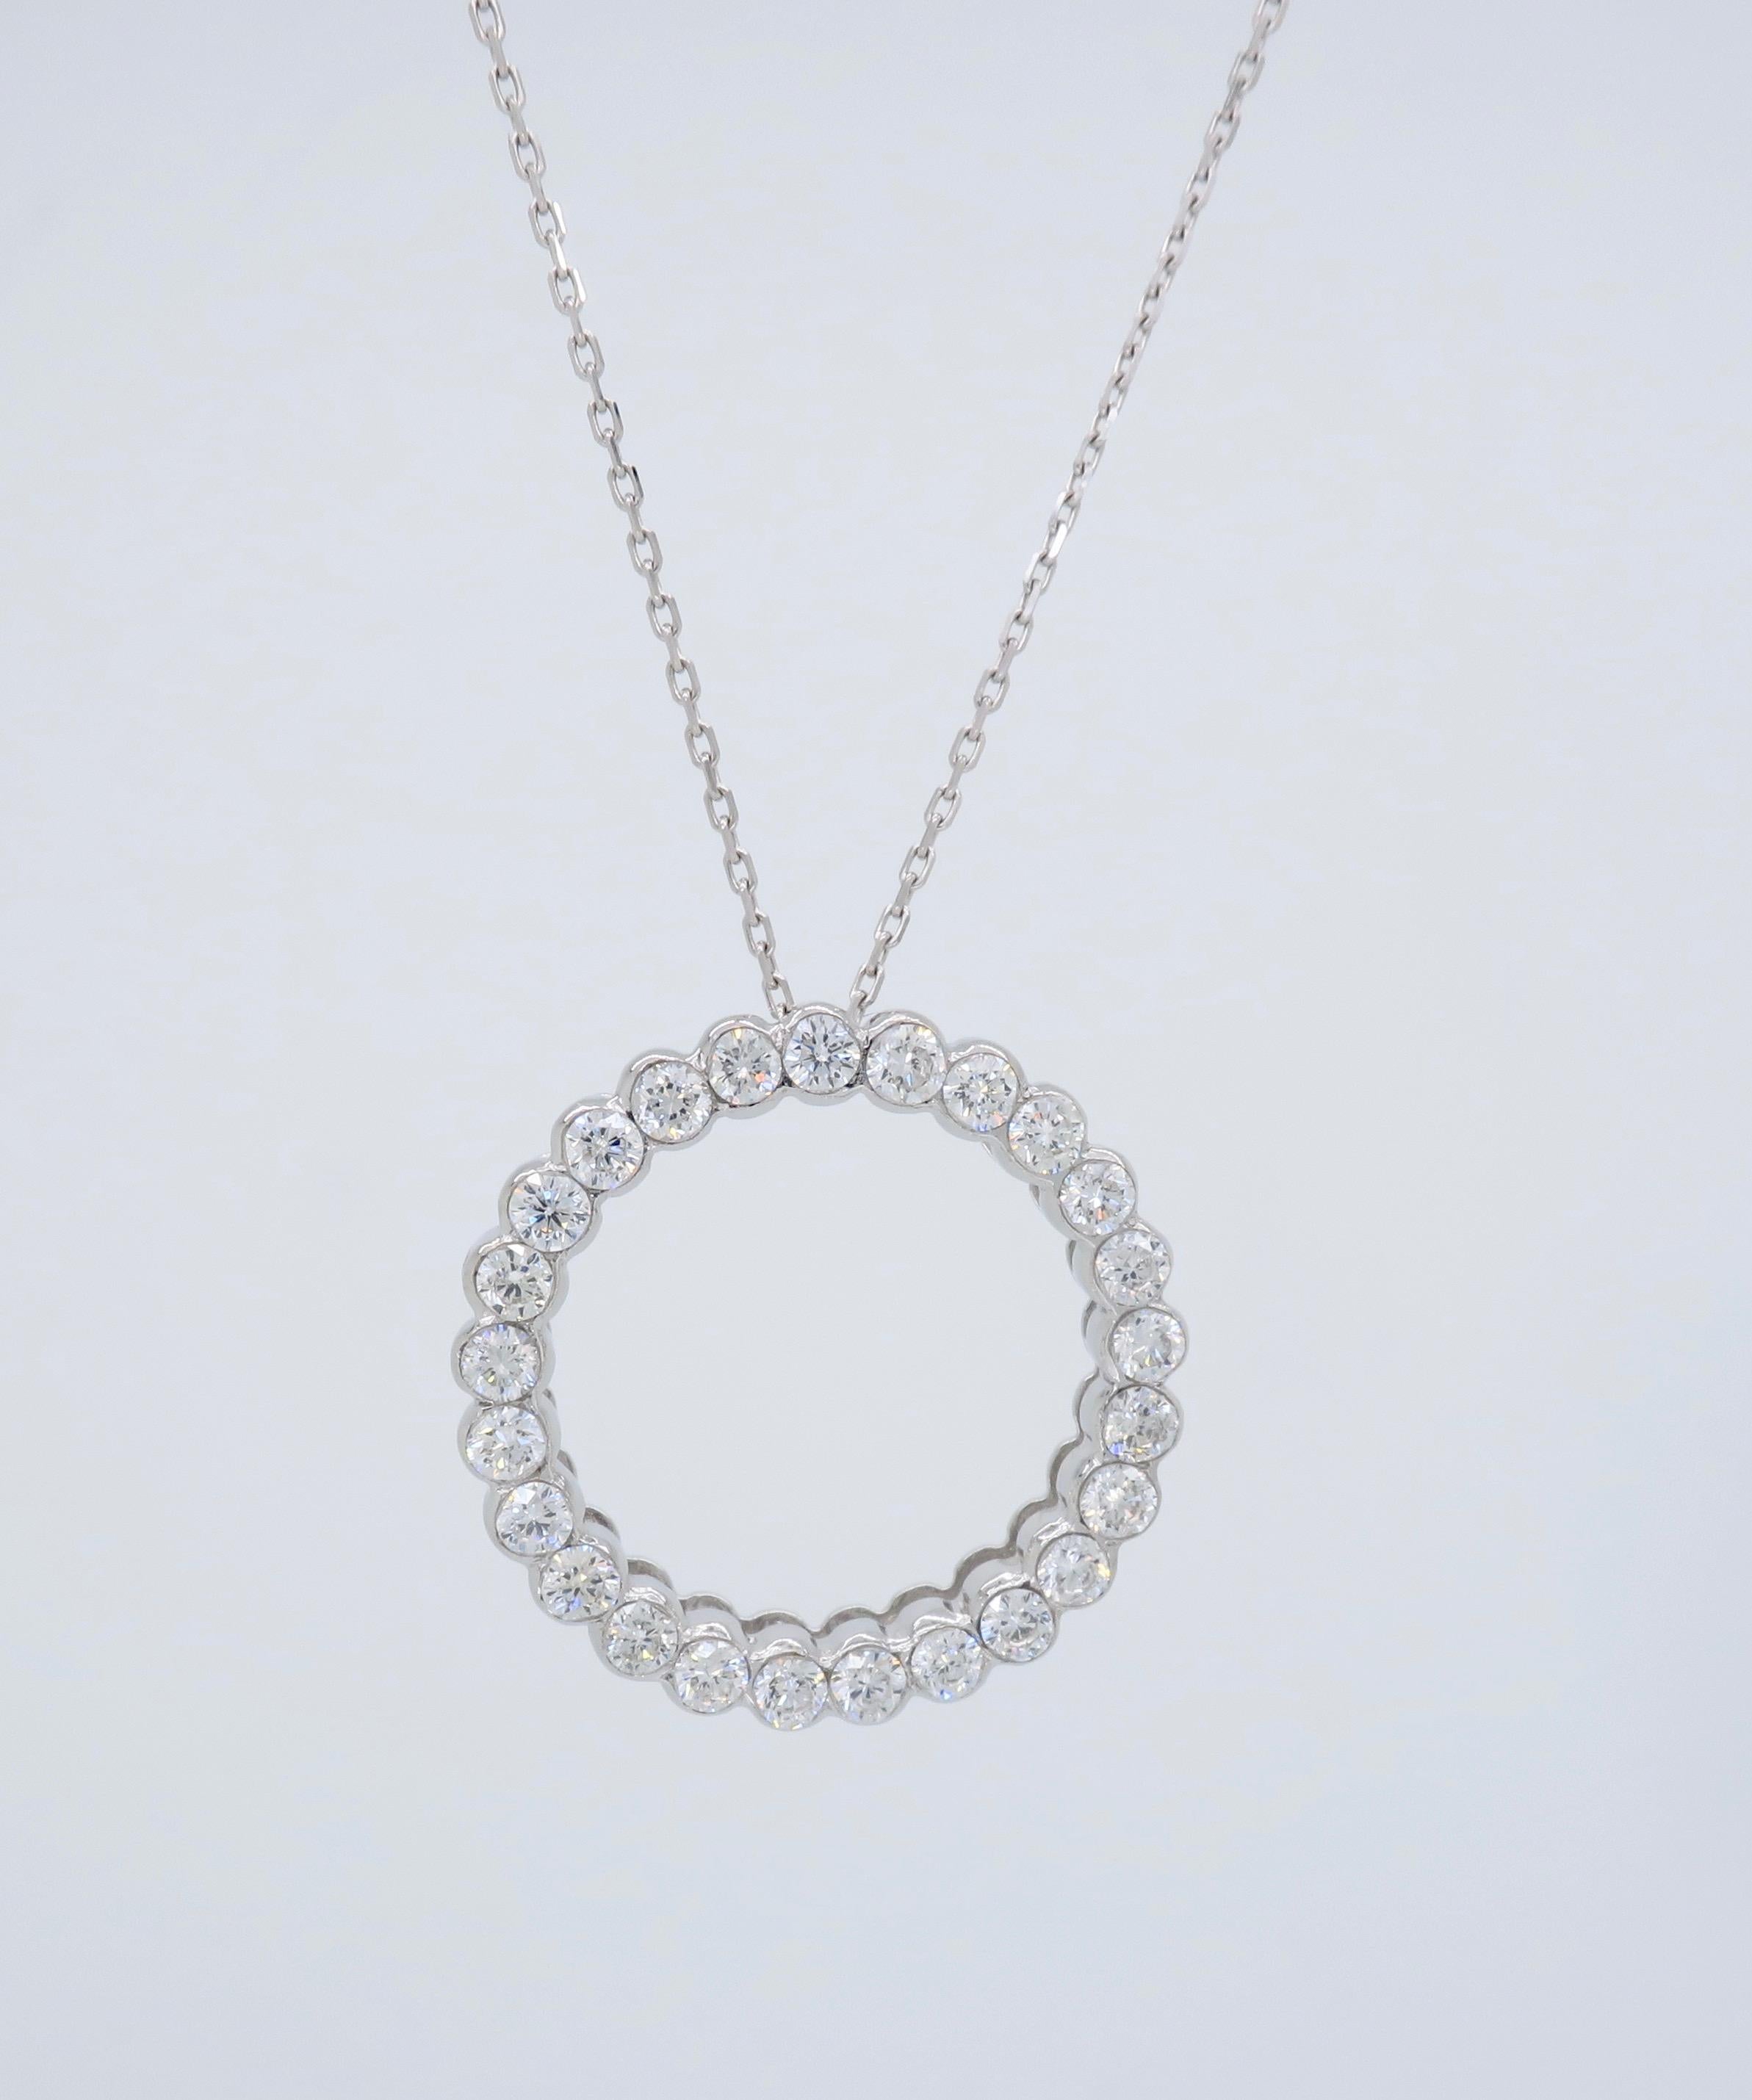 18K white gold circular diamond necklace featuring approximately .80ctw of Round Brilliant cut diamonds.

Total Diamond Carat Weight:  Approximately .80CTW
Diamond Cut: Round Brilliant 
Color: Average G-H
Clarity: Average VS
Metal: 18K White